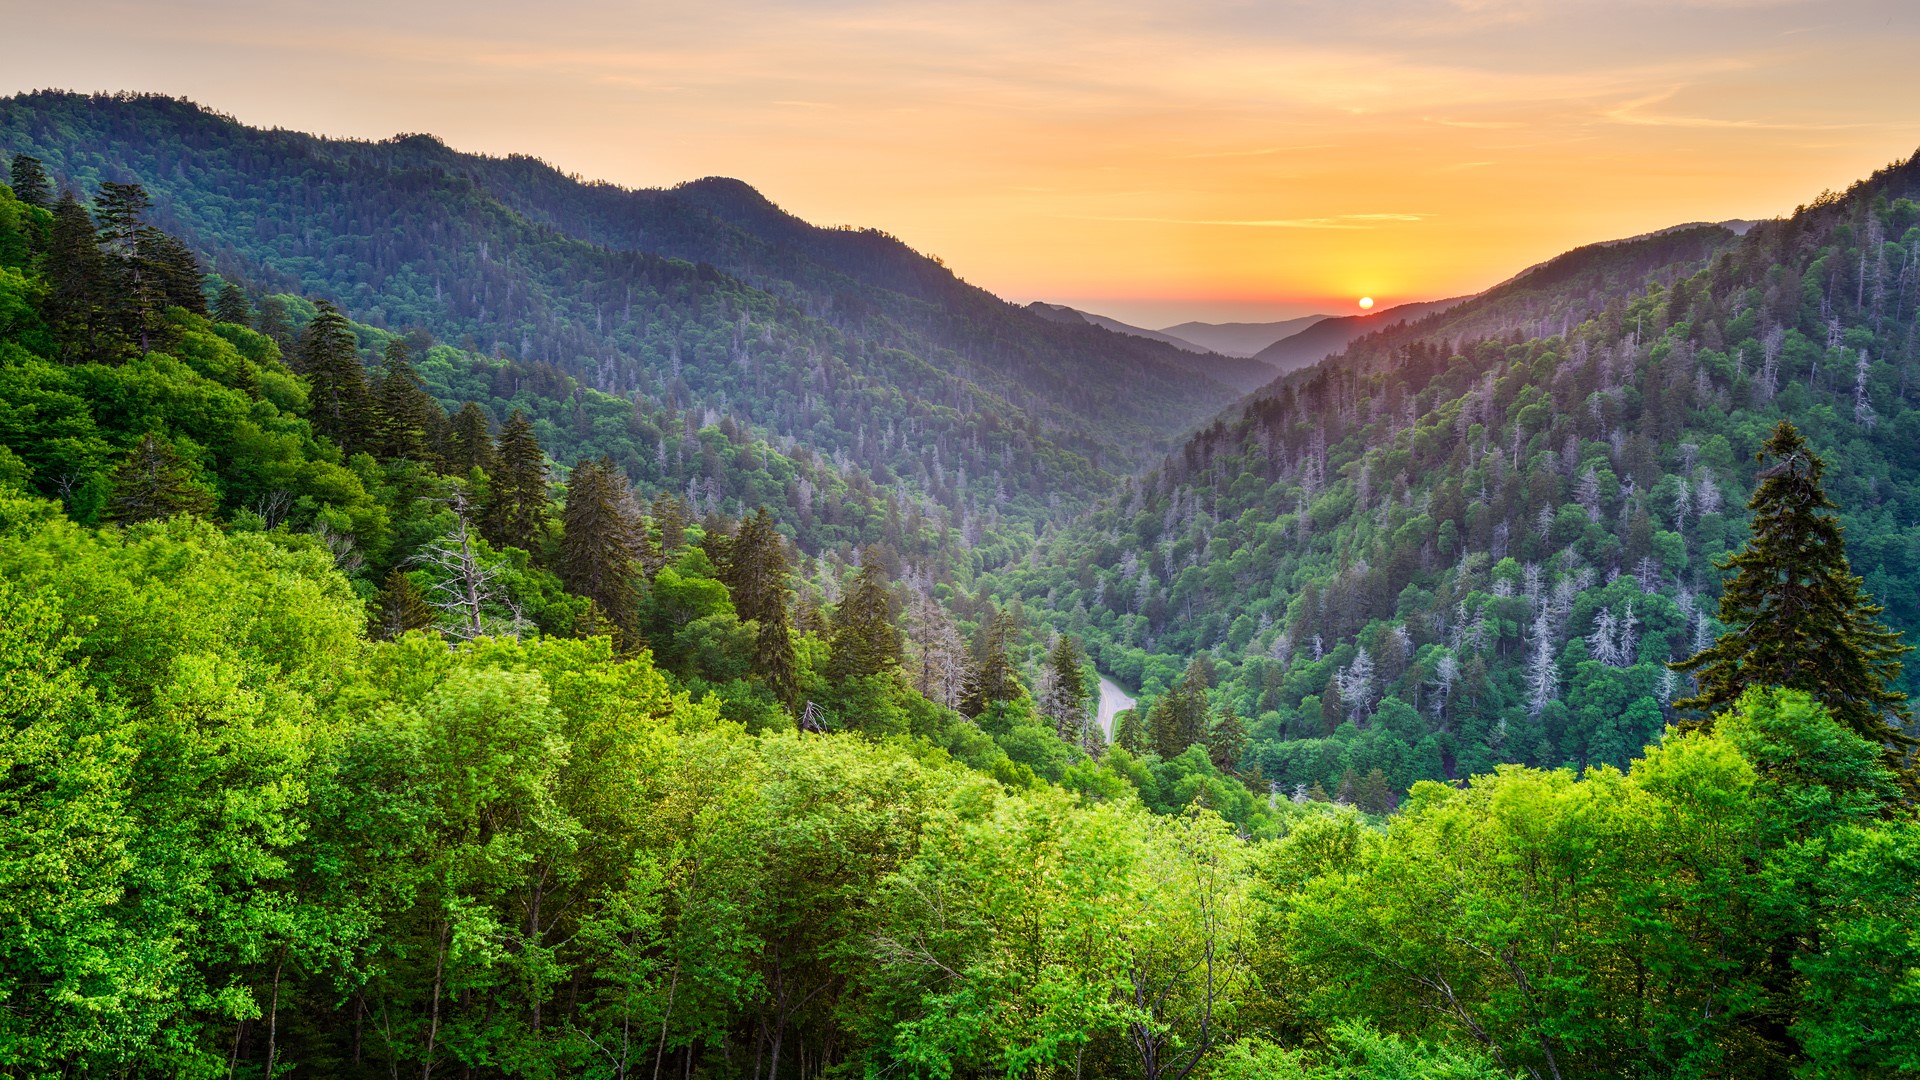 Nature Landscape Trees Mountains Sun Sunset Sky Forest Smoky Mountains Tennessee USA 1920x1080